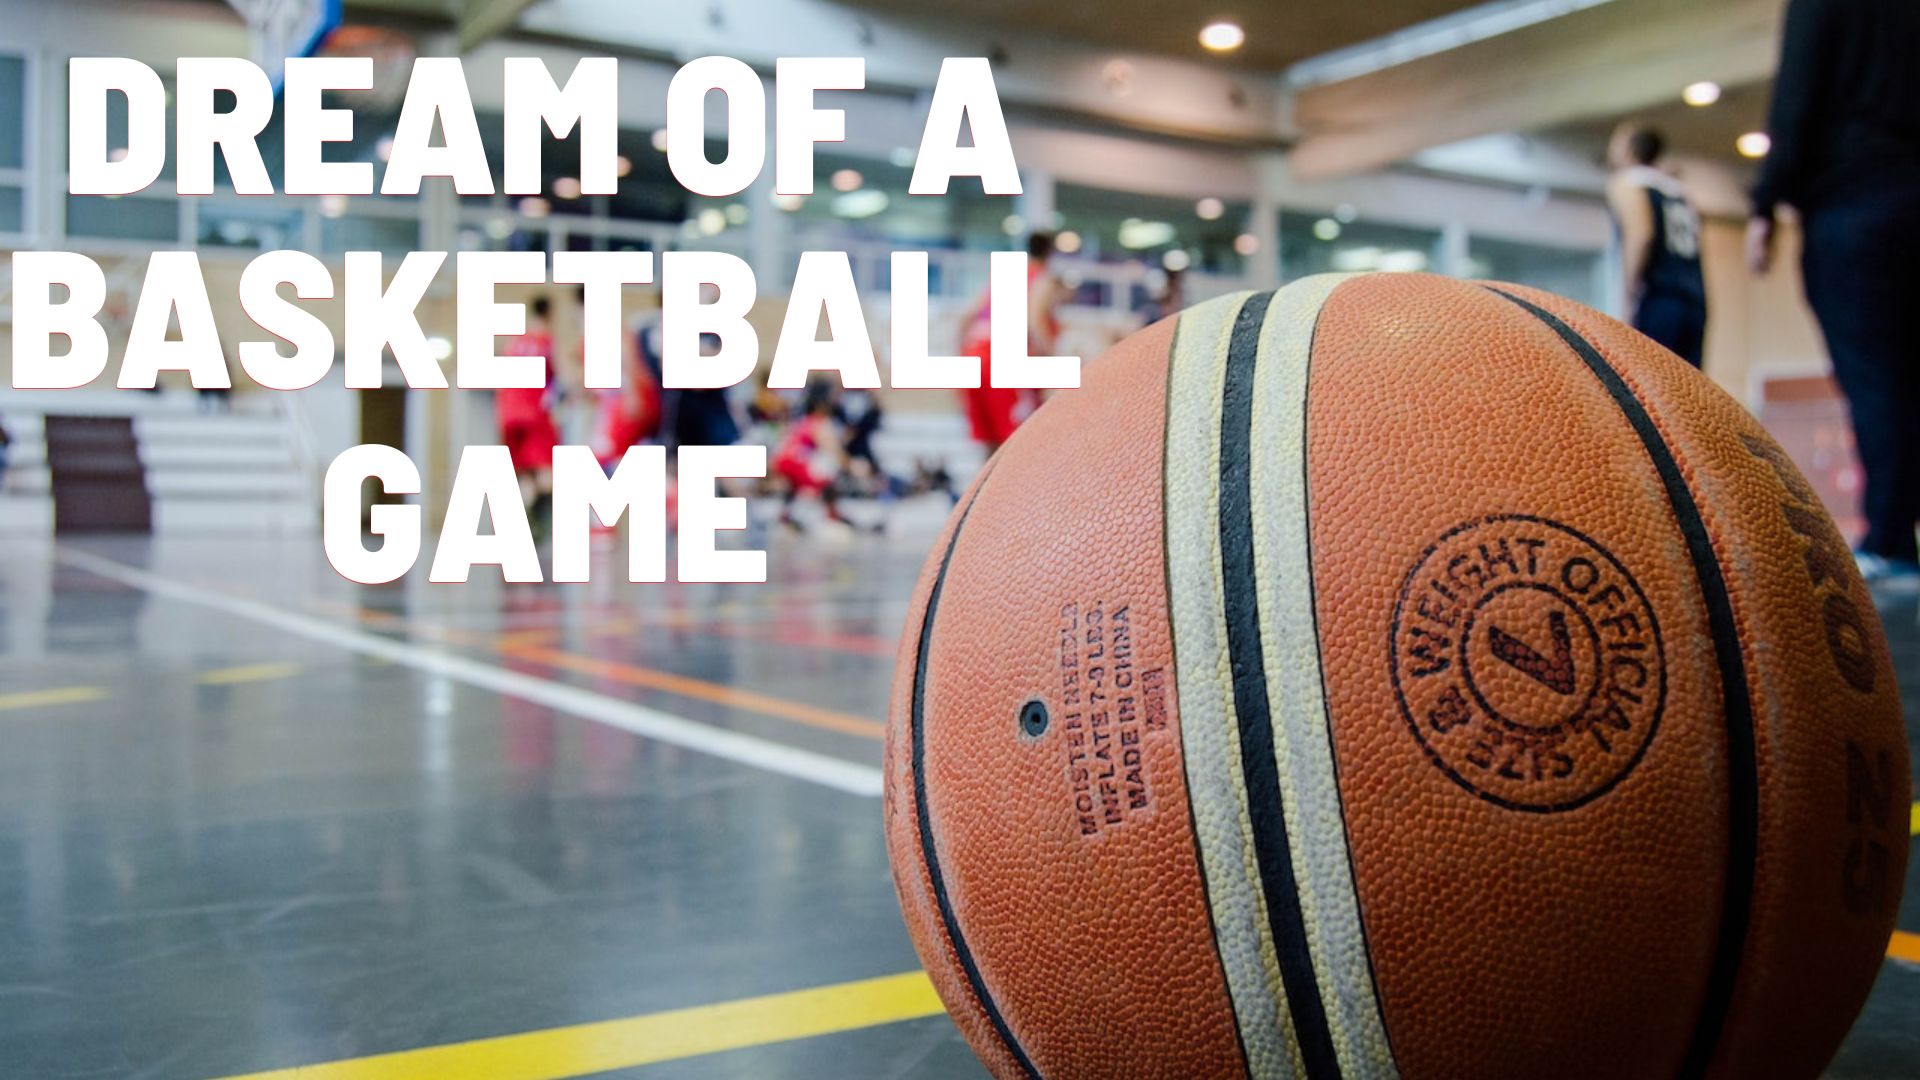 Dream Of A Basketball Game - Your Competitiveness In Certain Aspects